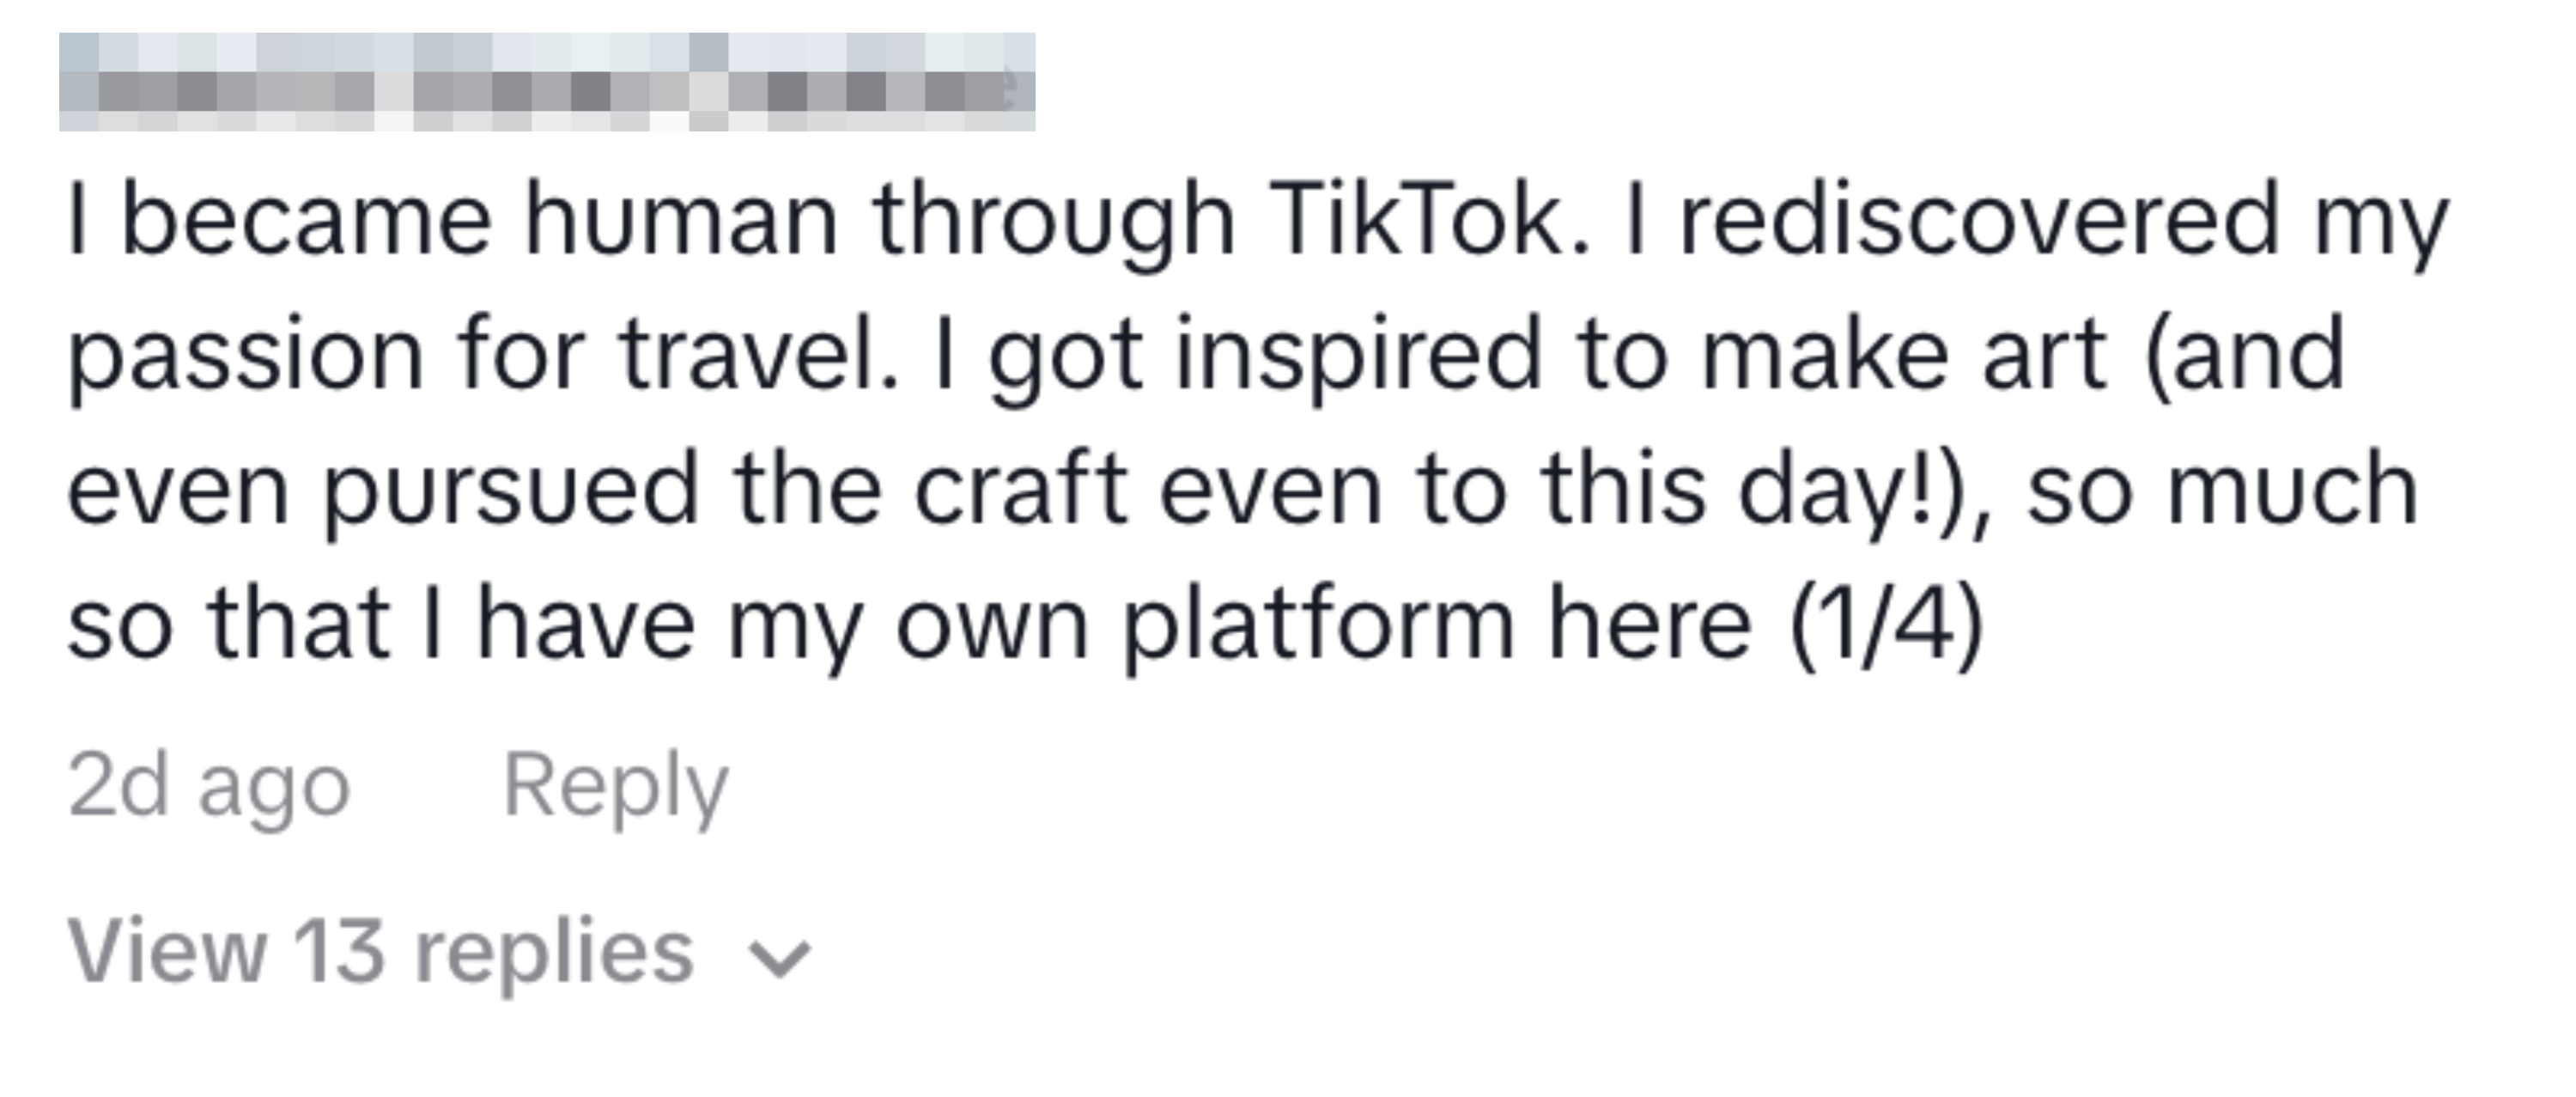 Text from a social media post discussing rediscovering a passion for travel and art through TikTok and creating a platform